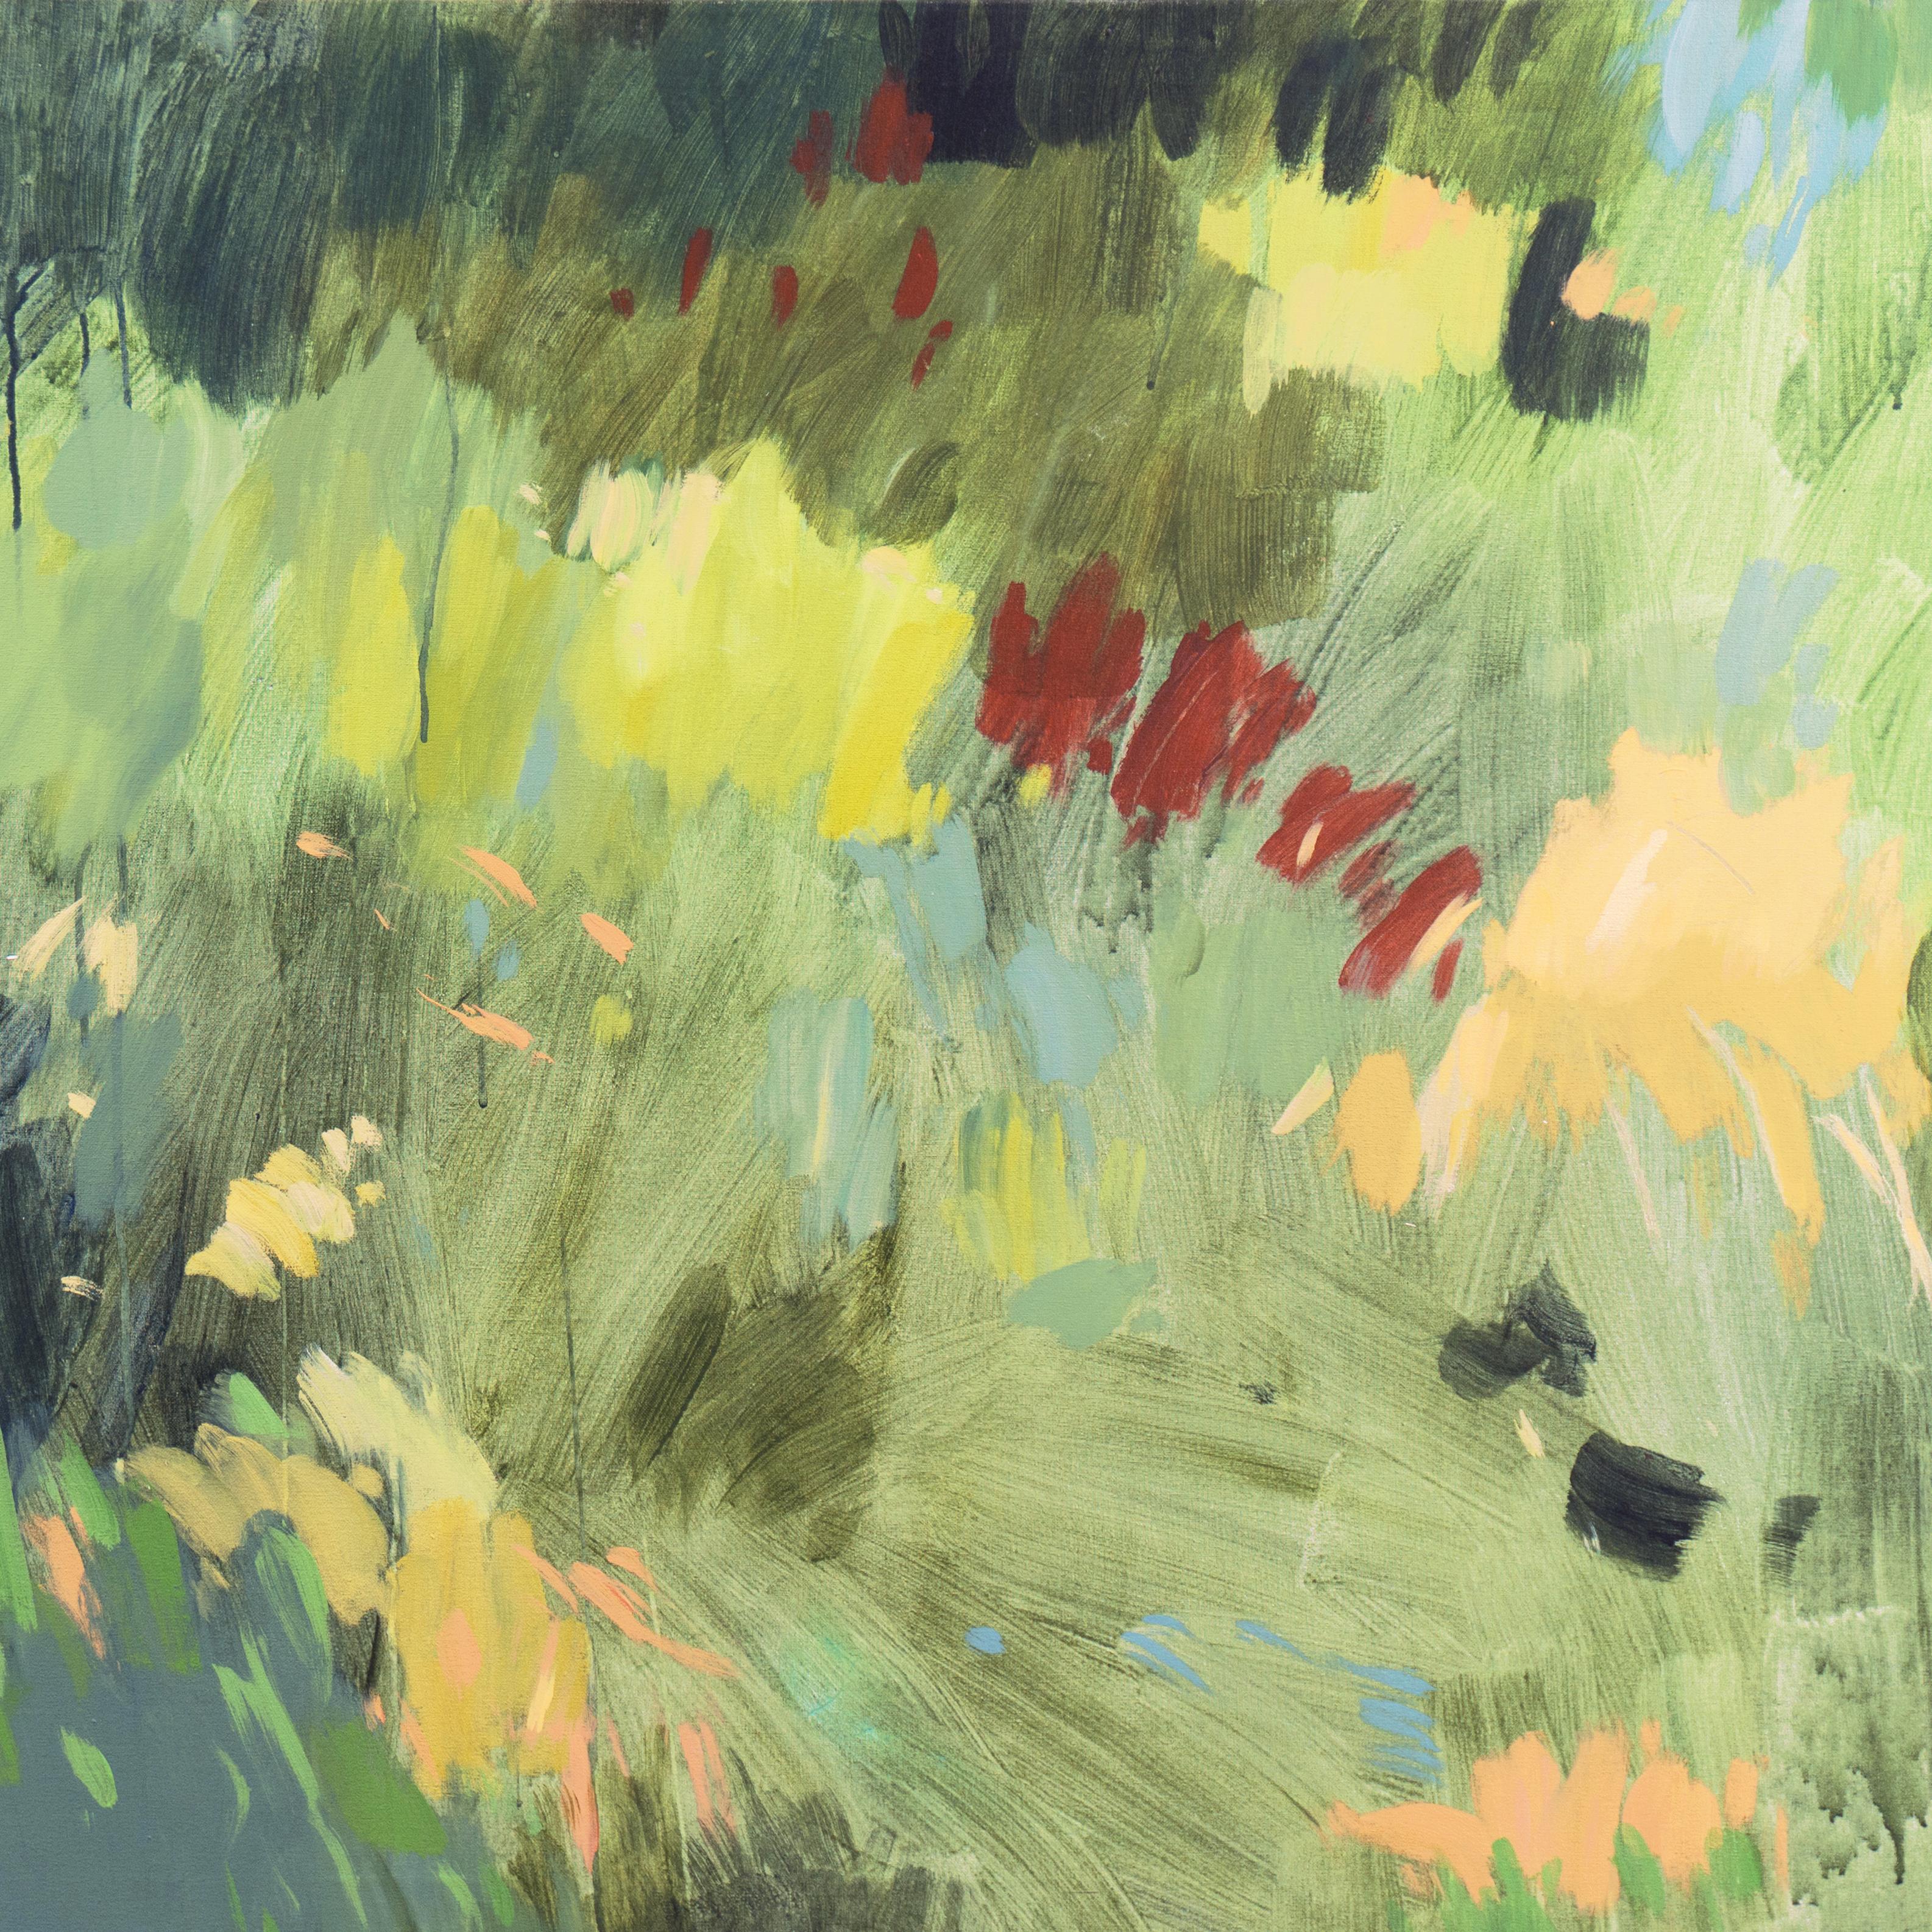 'Come May', Large Semi-Abstract Springtime Landscape, English artist - Painting by Jeremy Thornton